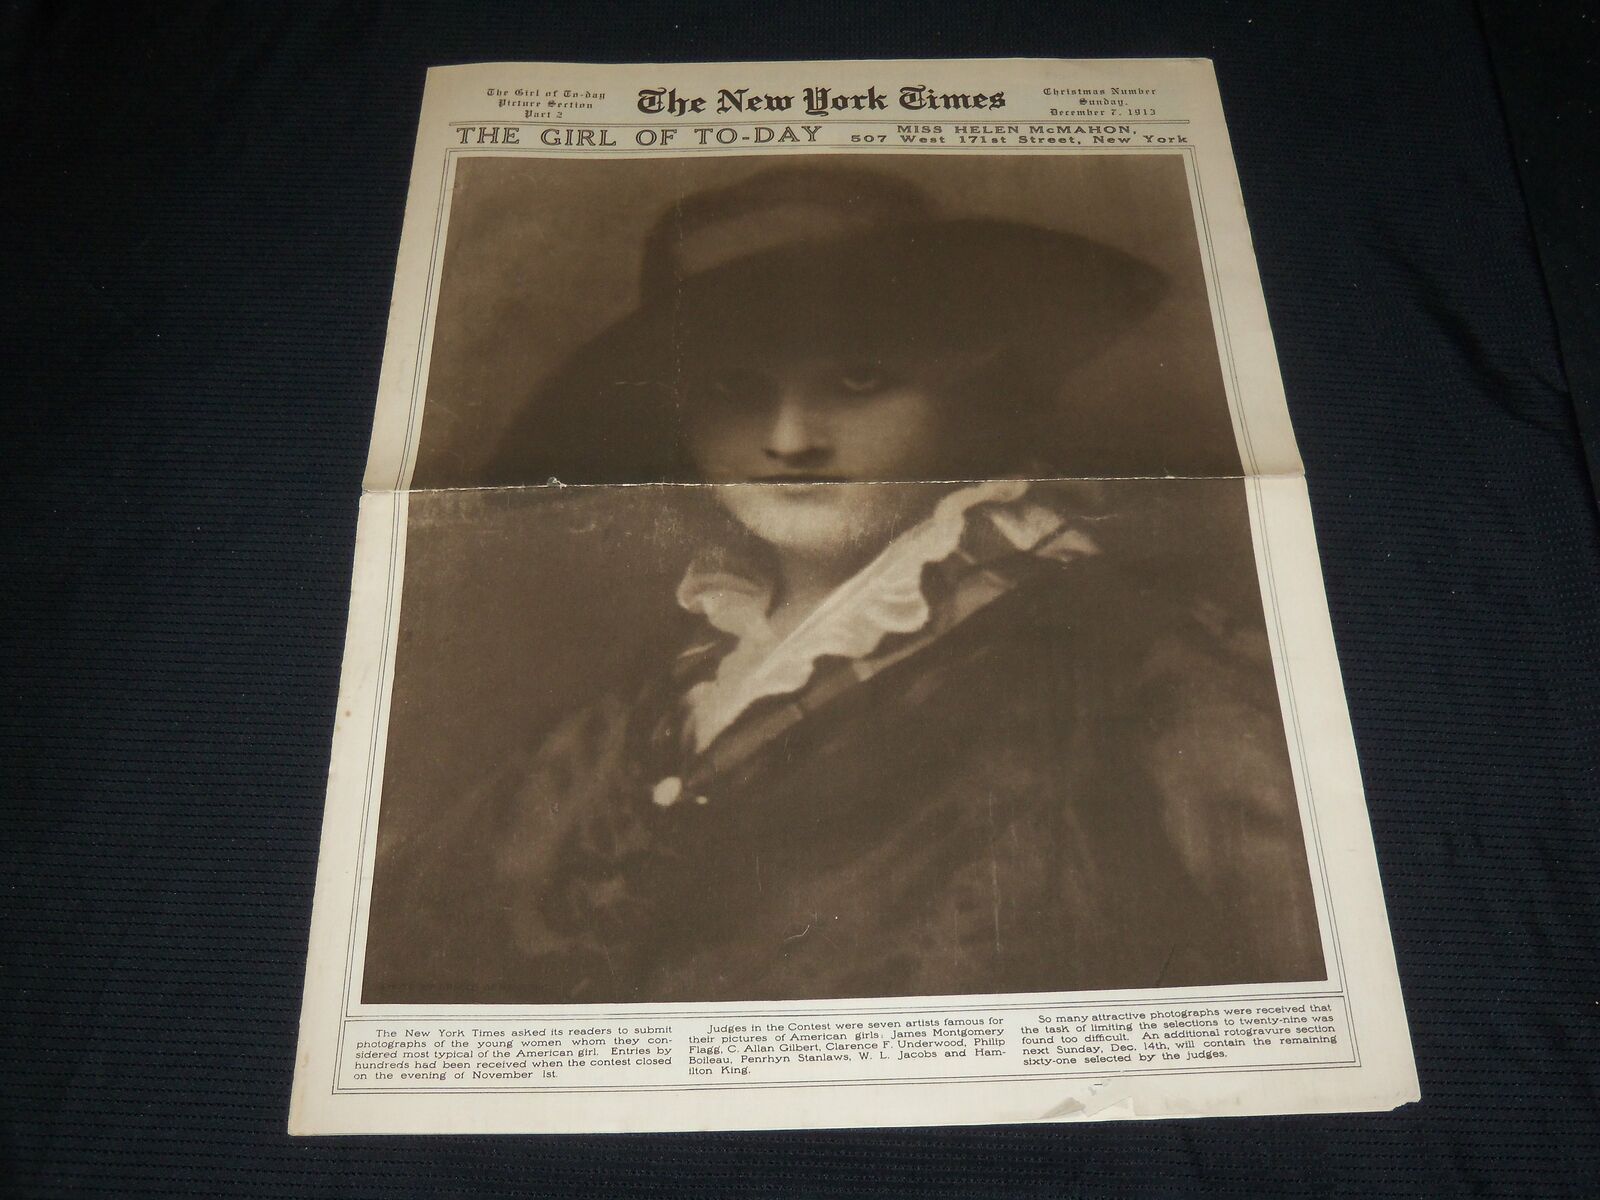 1913 DECEMBER 7 NEW YORK TIMES PICTURE SECTION - GIRL OF TODAY - NP 5614